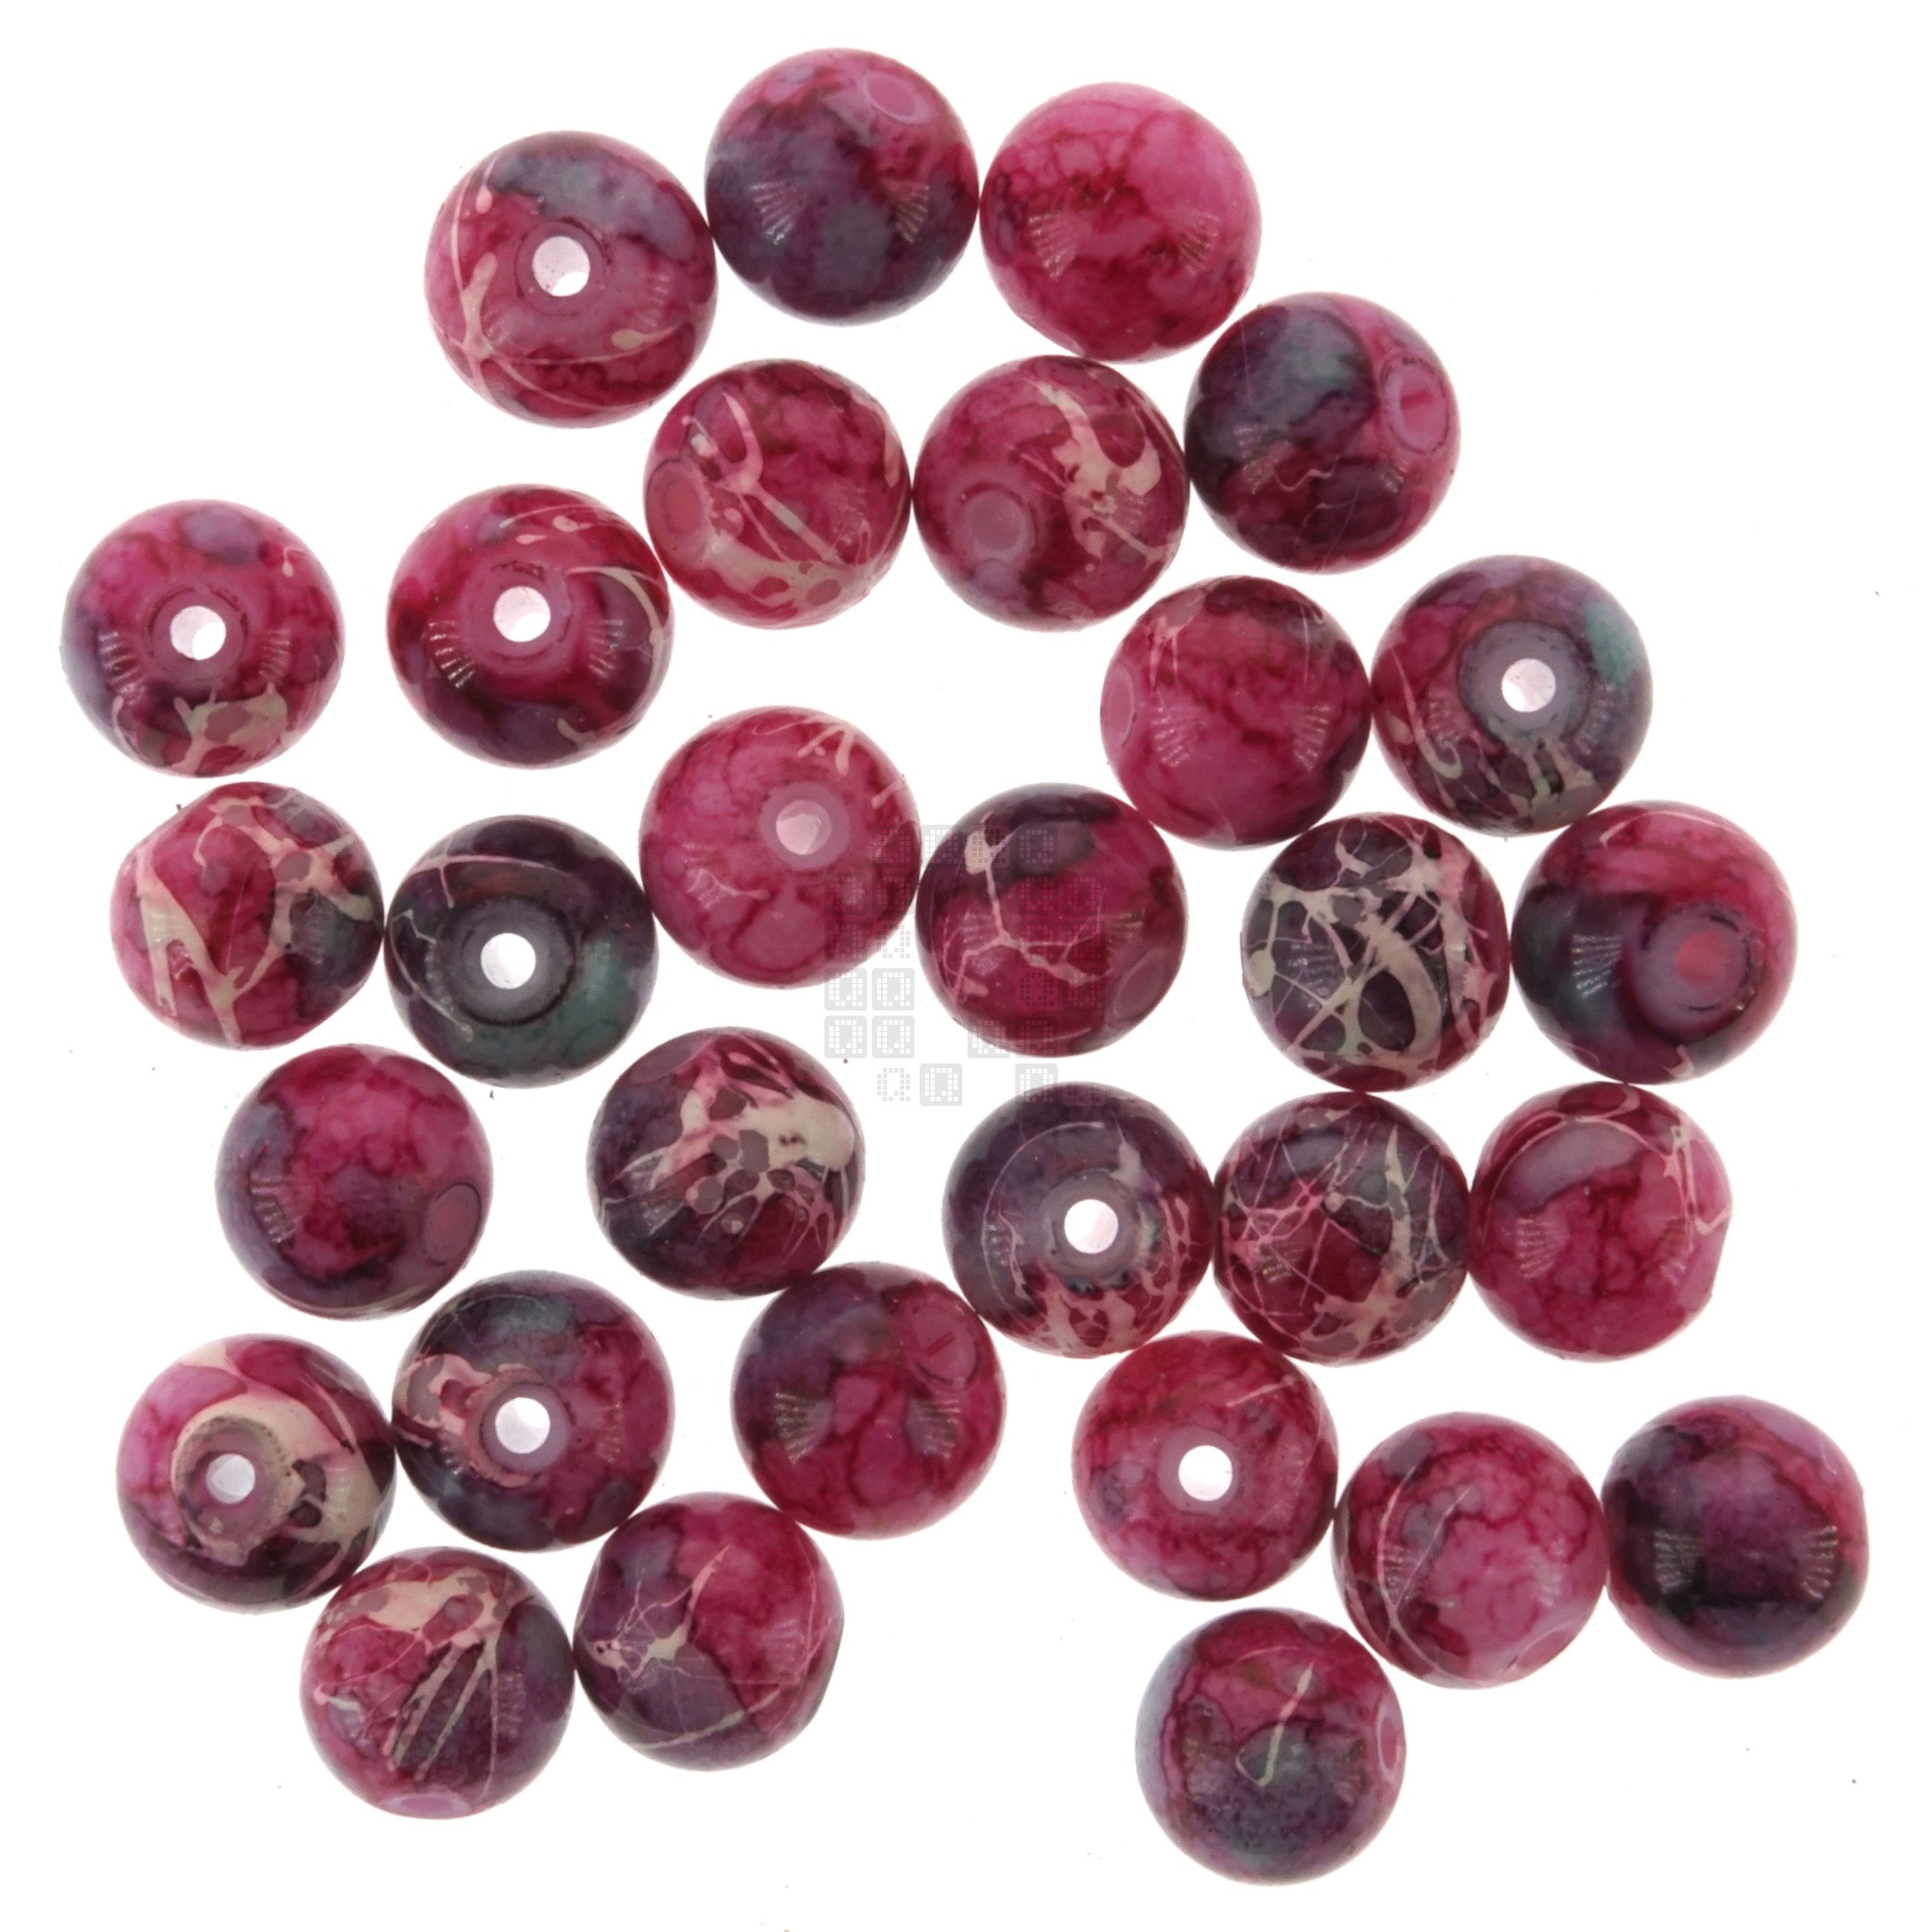 Iced Raspberry 8mm Loose Glass Beads, 30 Pieces